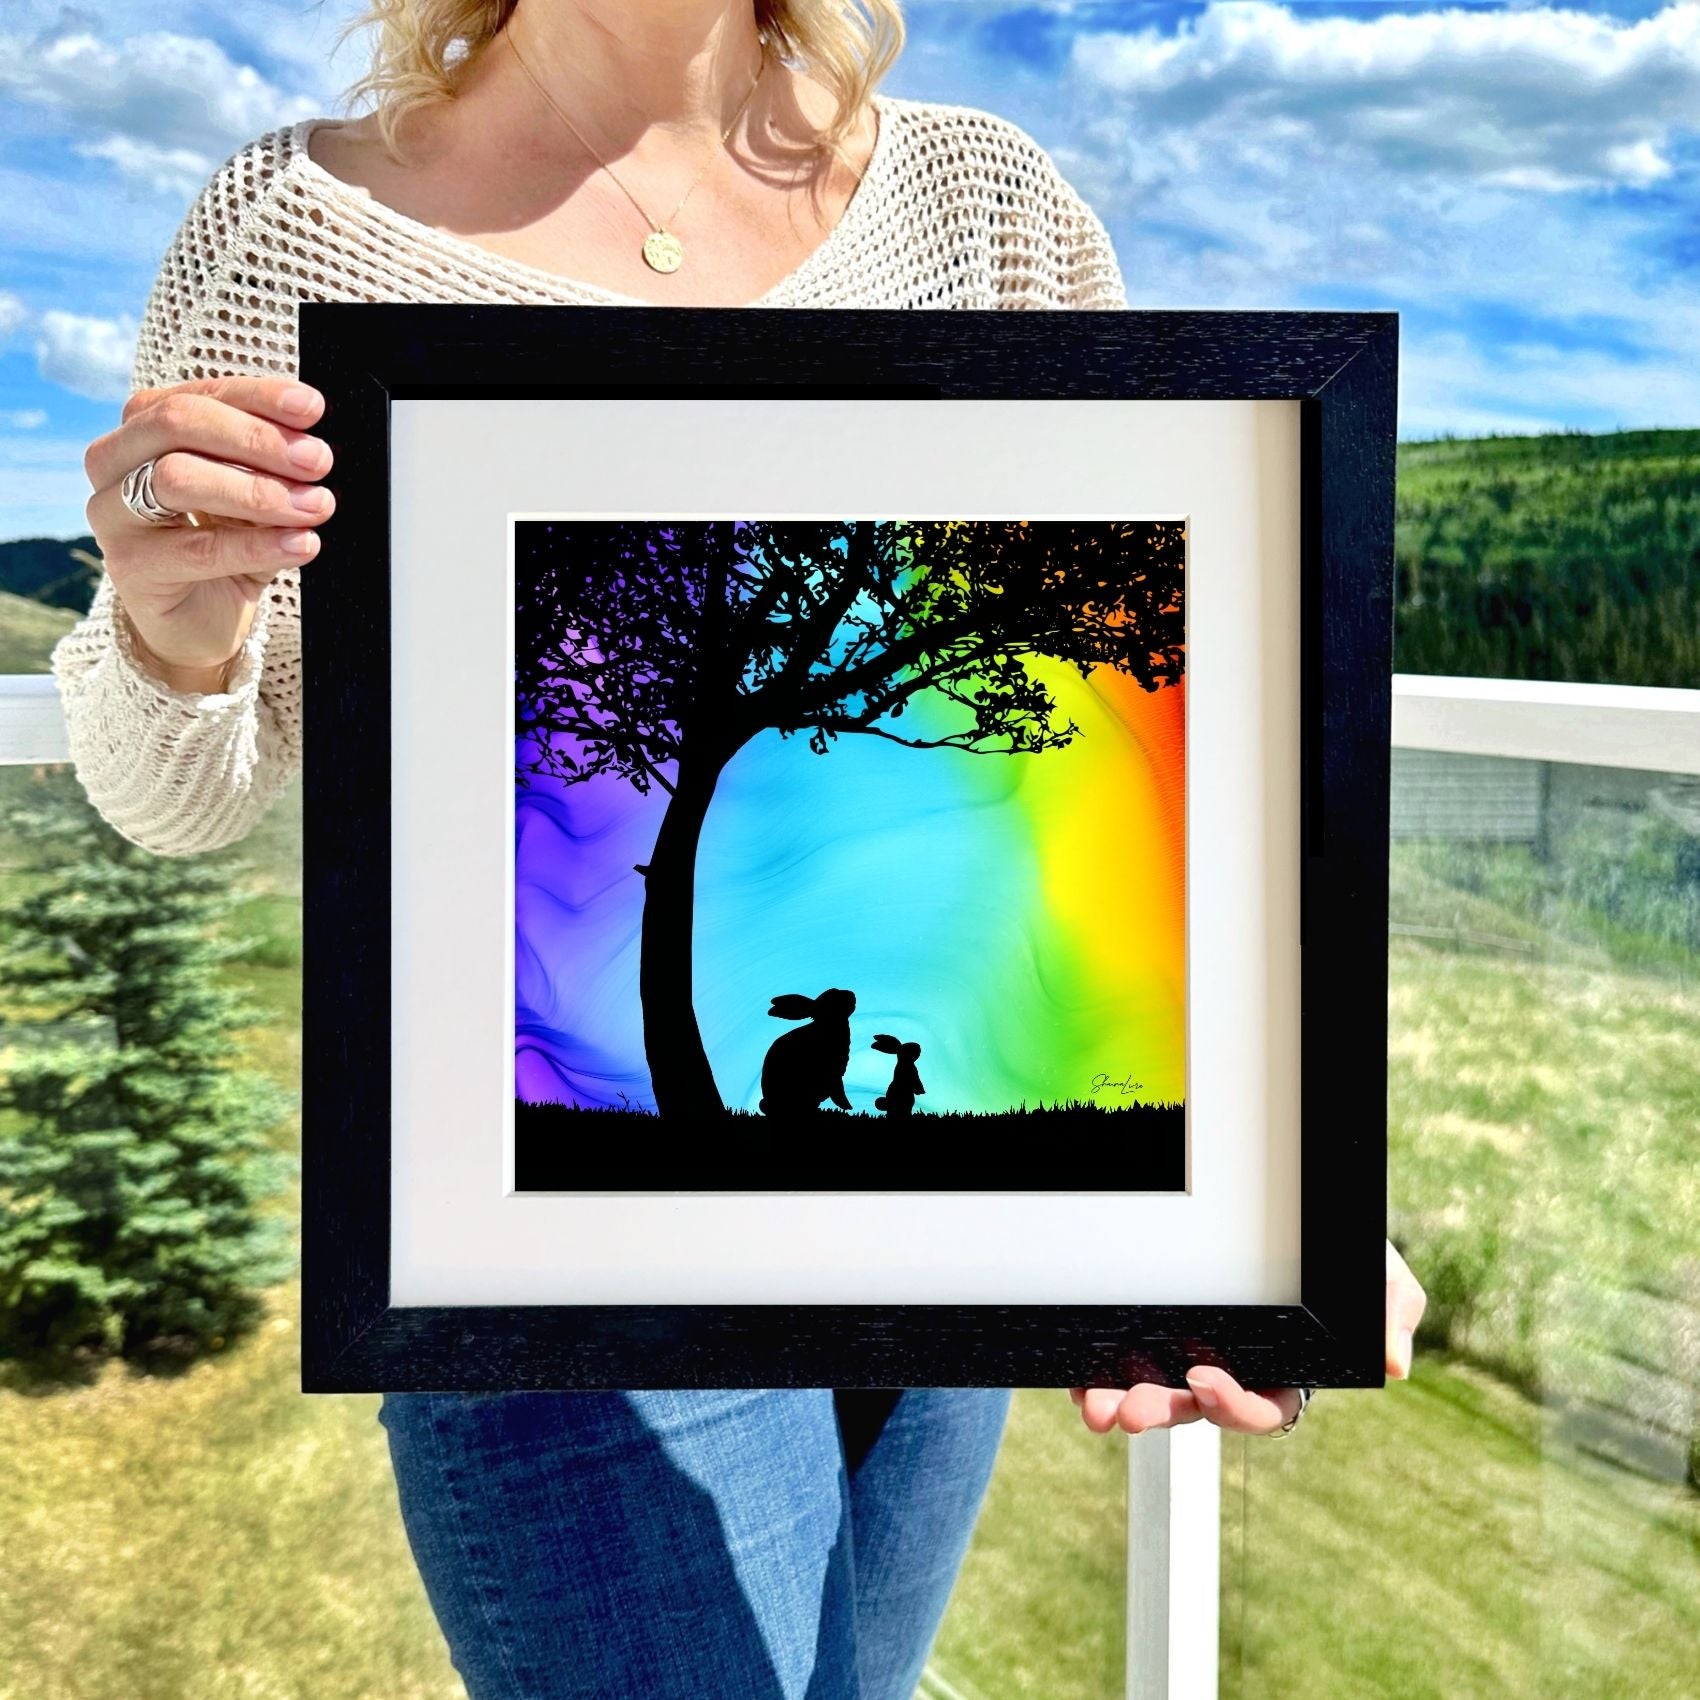 Dreaming Together - Fire Made Art Print